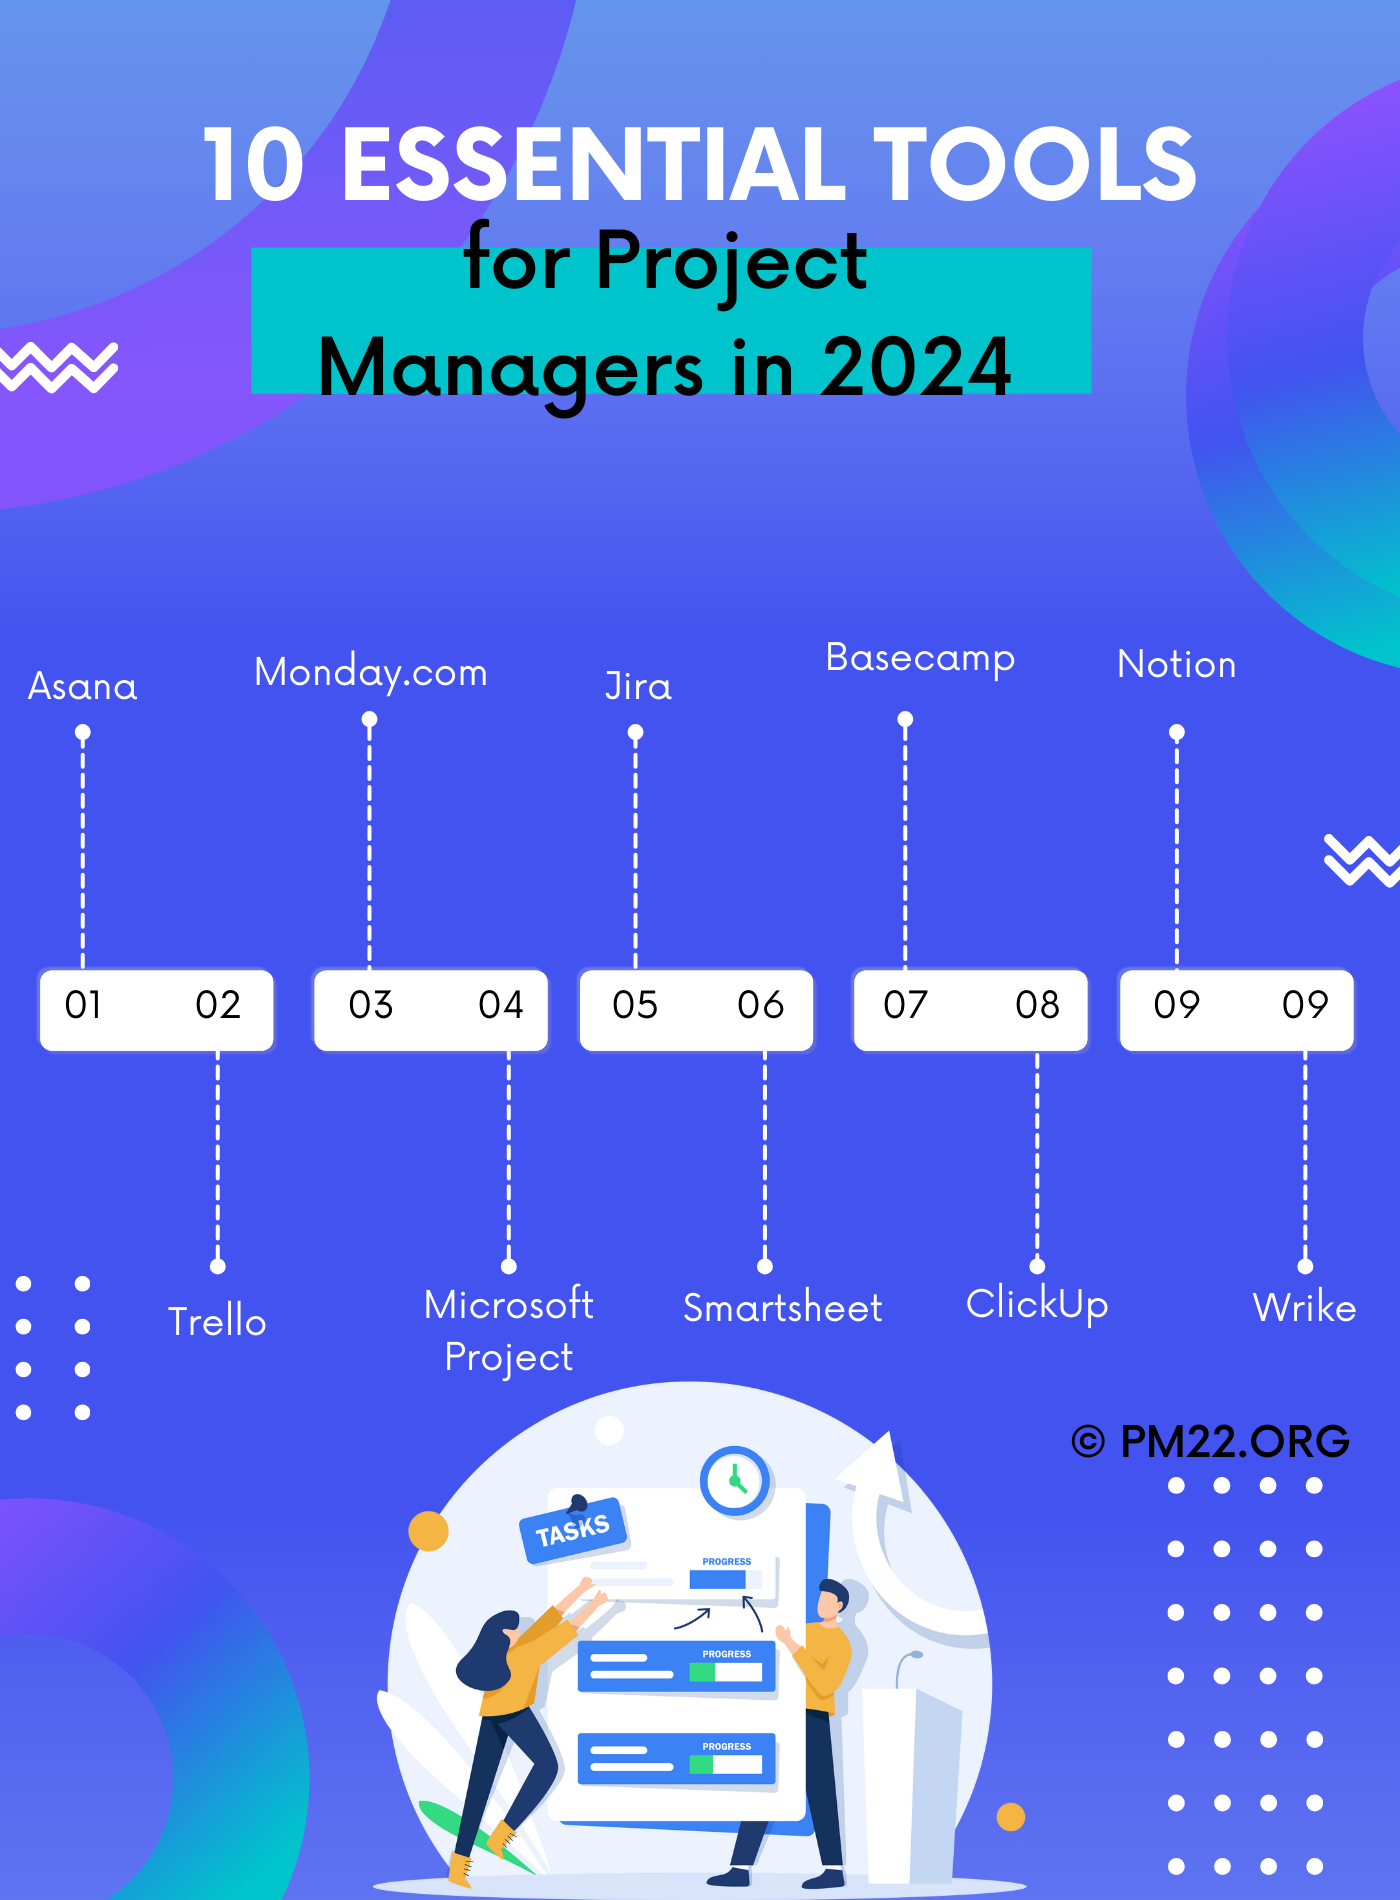 10 Essential Tools for Project Managers in 2024